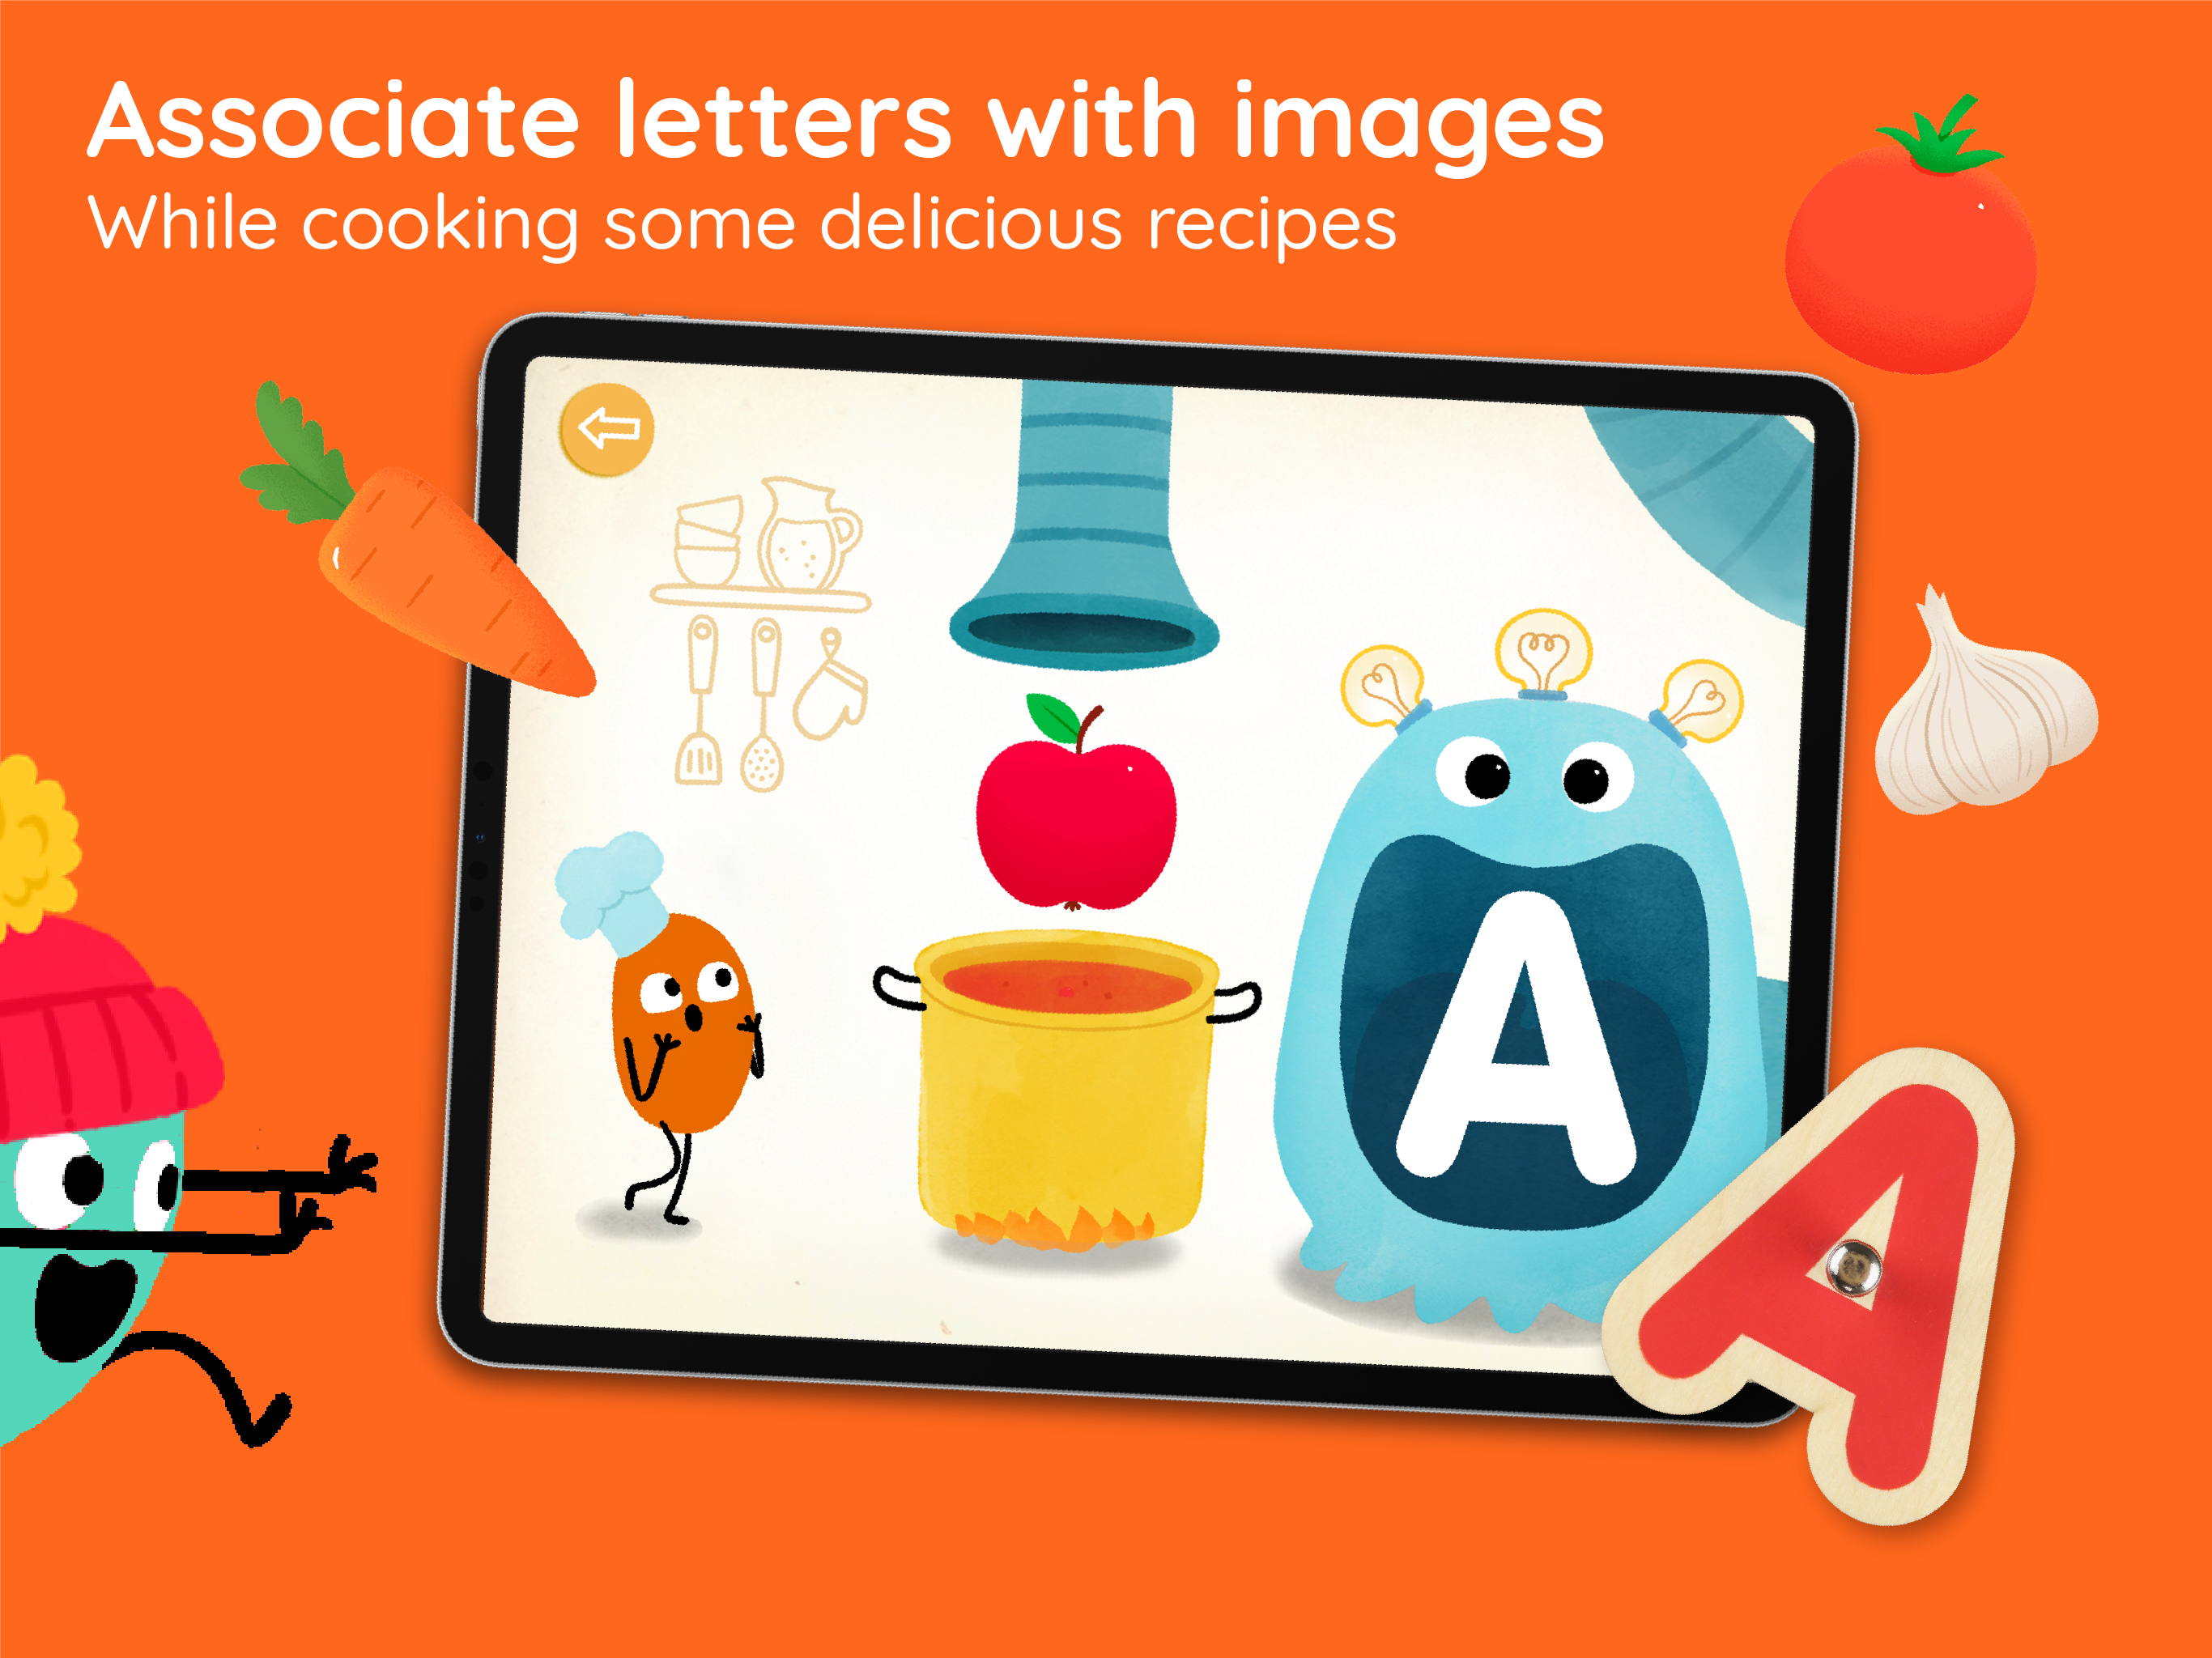 Associate letters with images